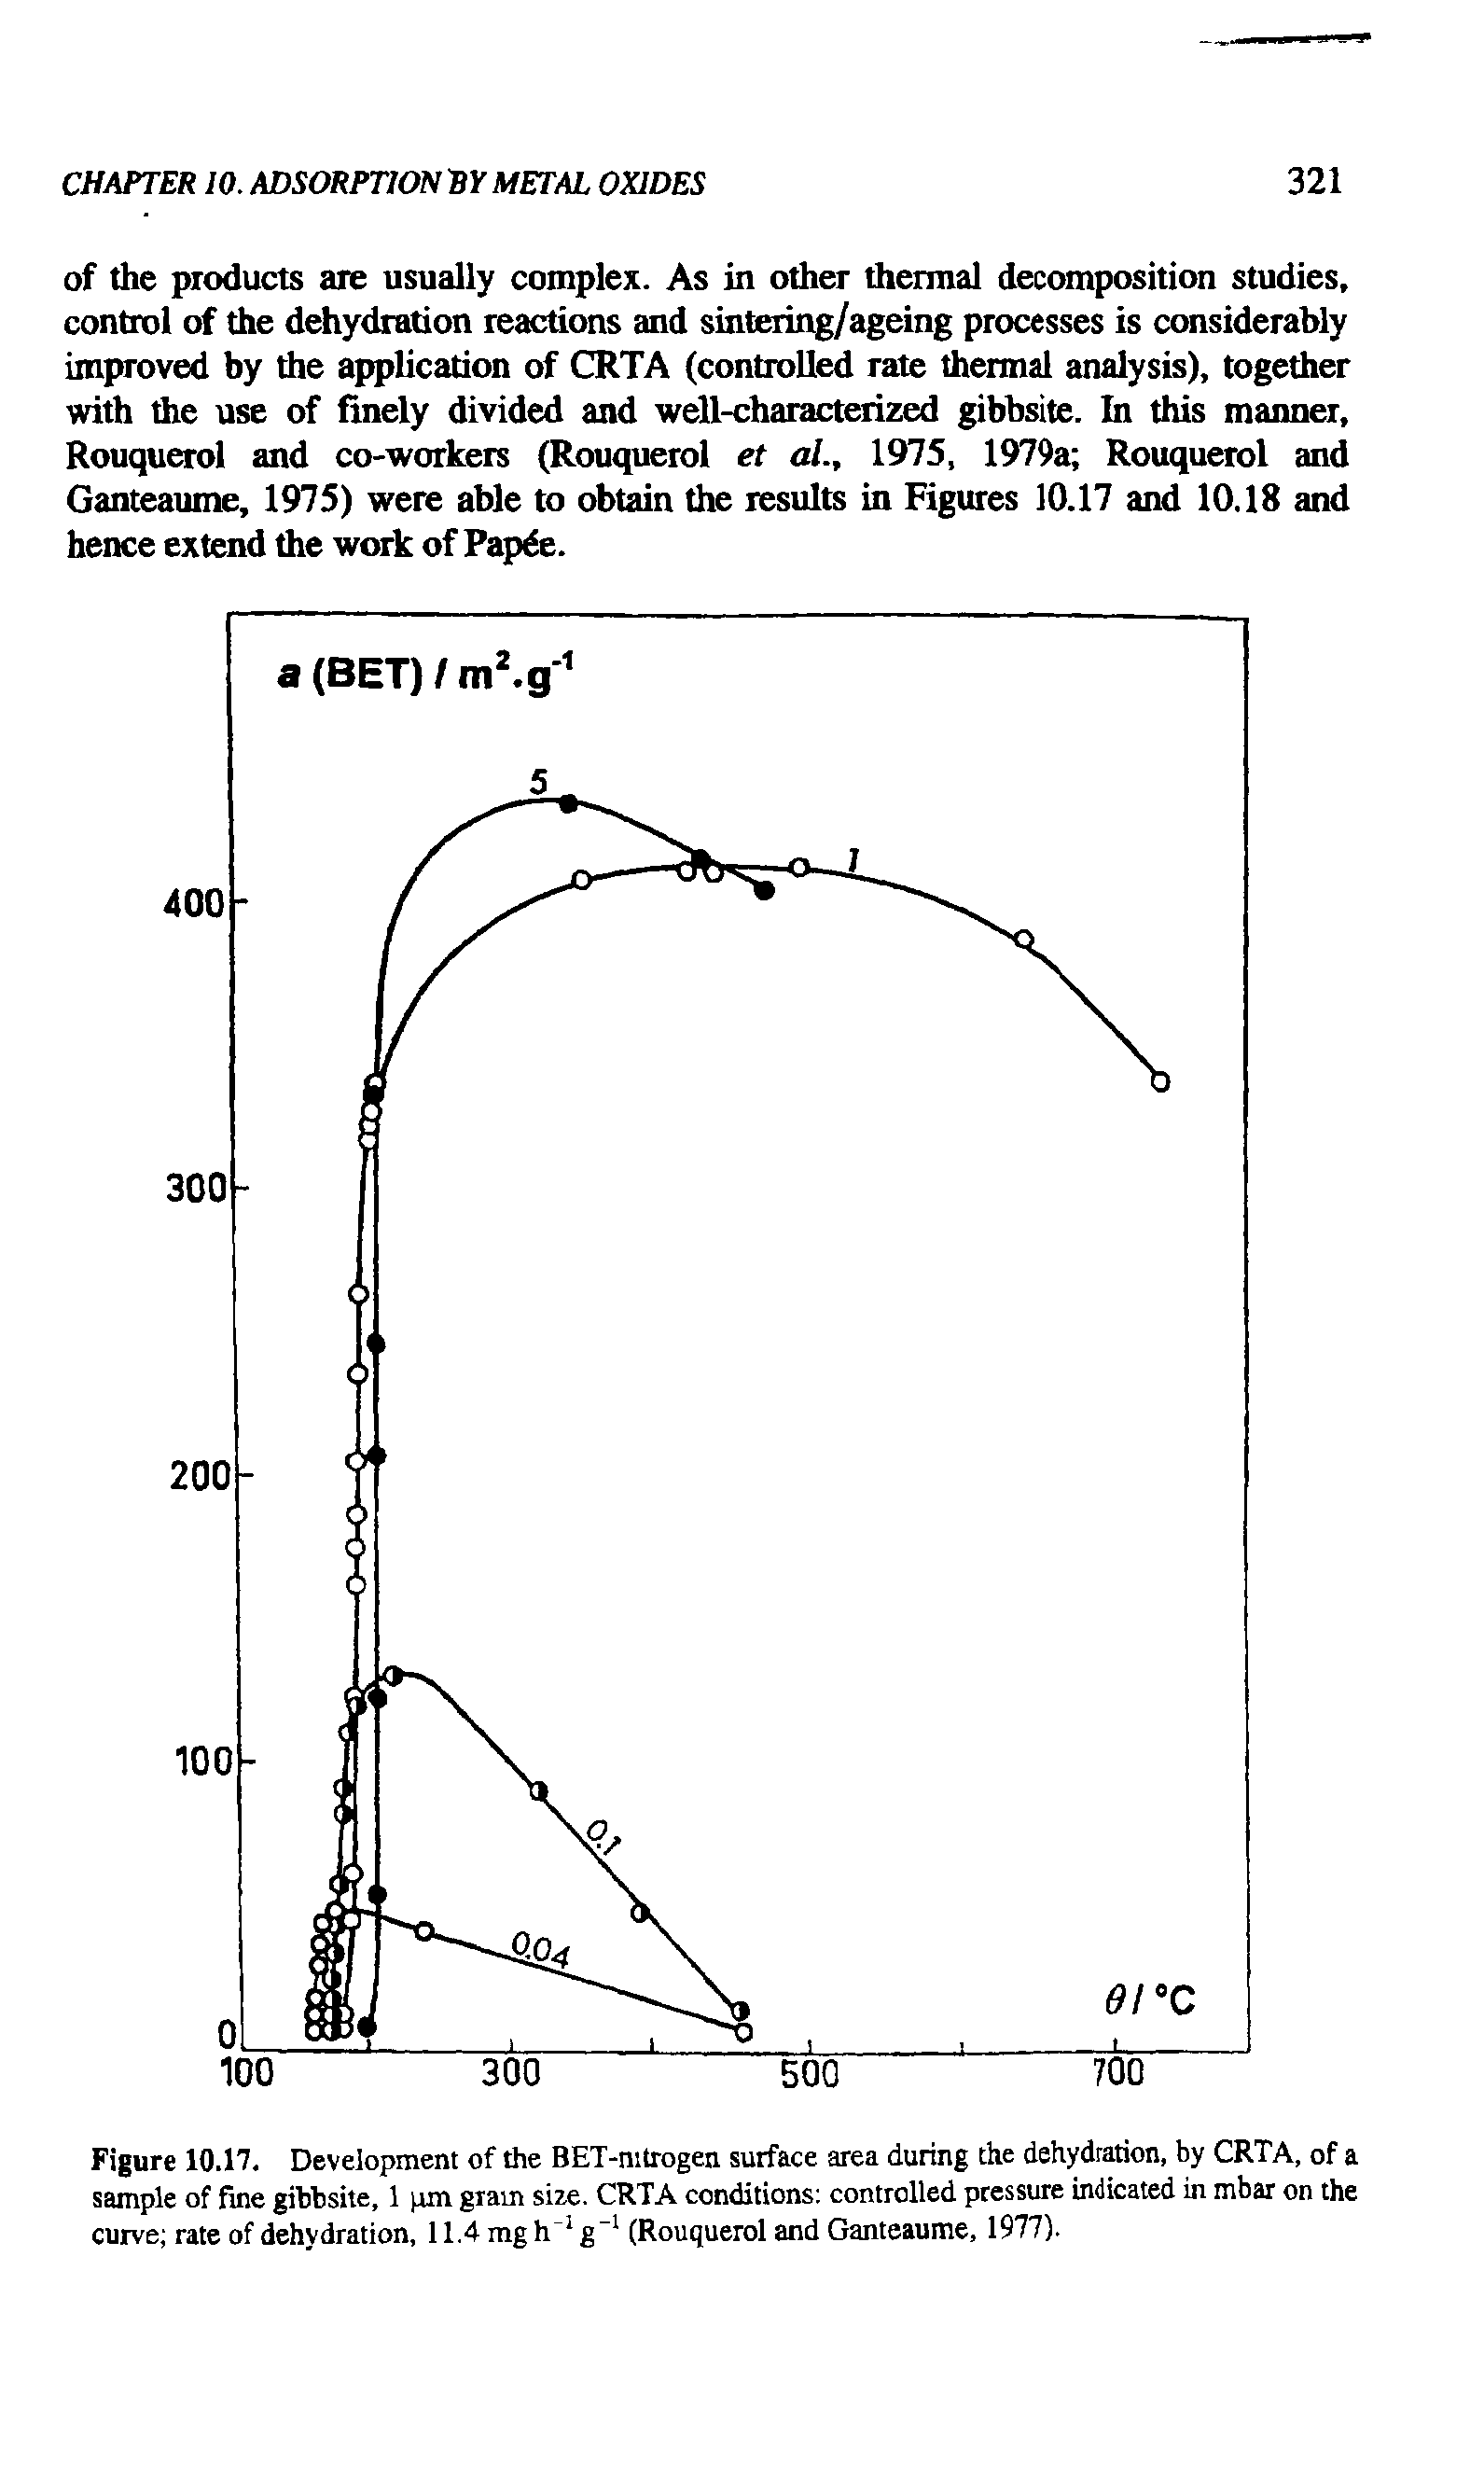 Figure 10.17. Development of the BET-mtrogen surface area during the dehydration, by CRTA, of a sample of fine gibbsite, 1 pm gram size. CRTA conditions controlled pressure indicated in mbar on the curve rate of dehydration, 11.4 mg IT1 g"1 (Rouquerol and Ganteaume, 1977).